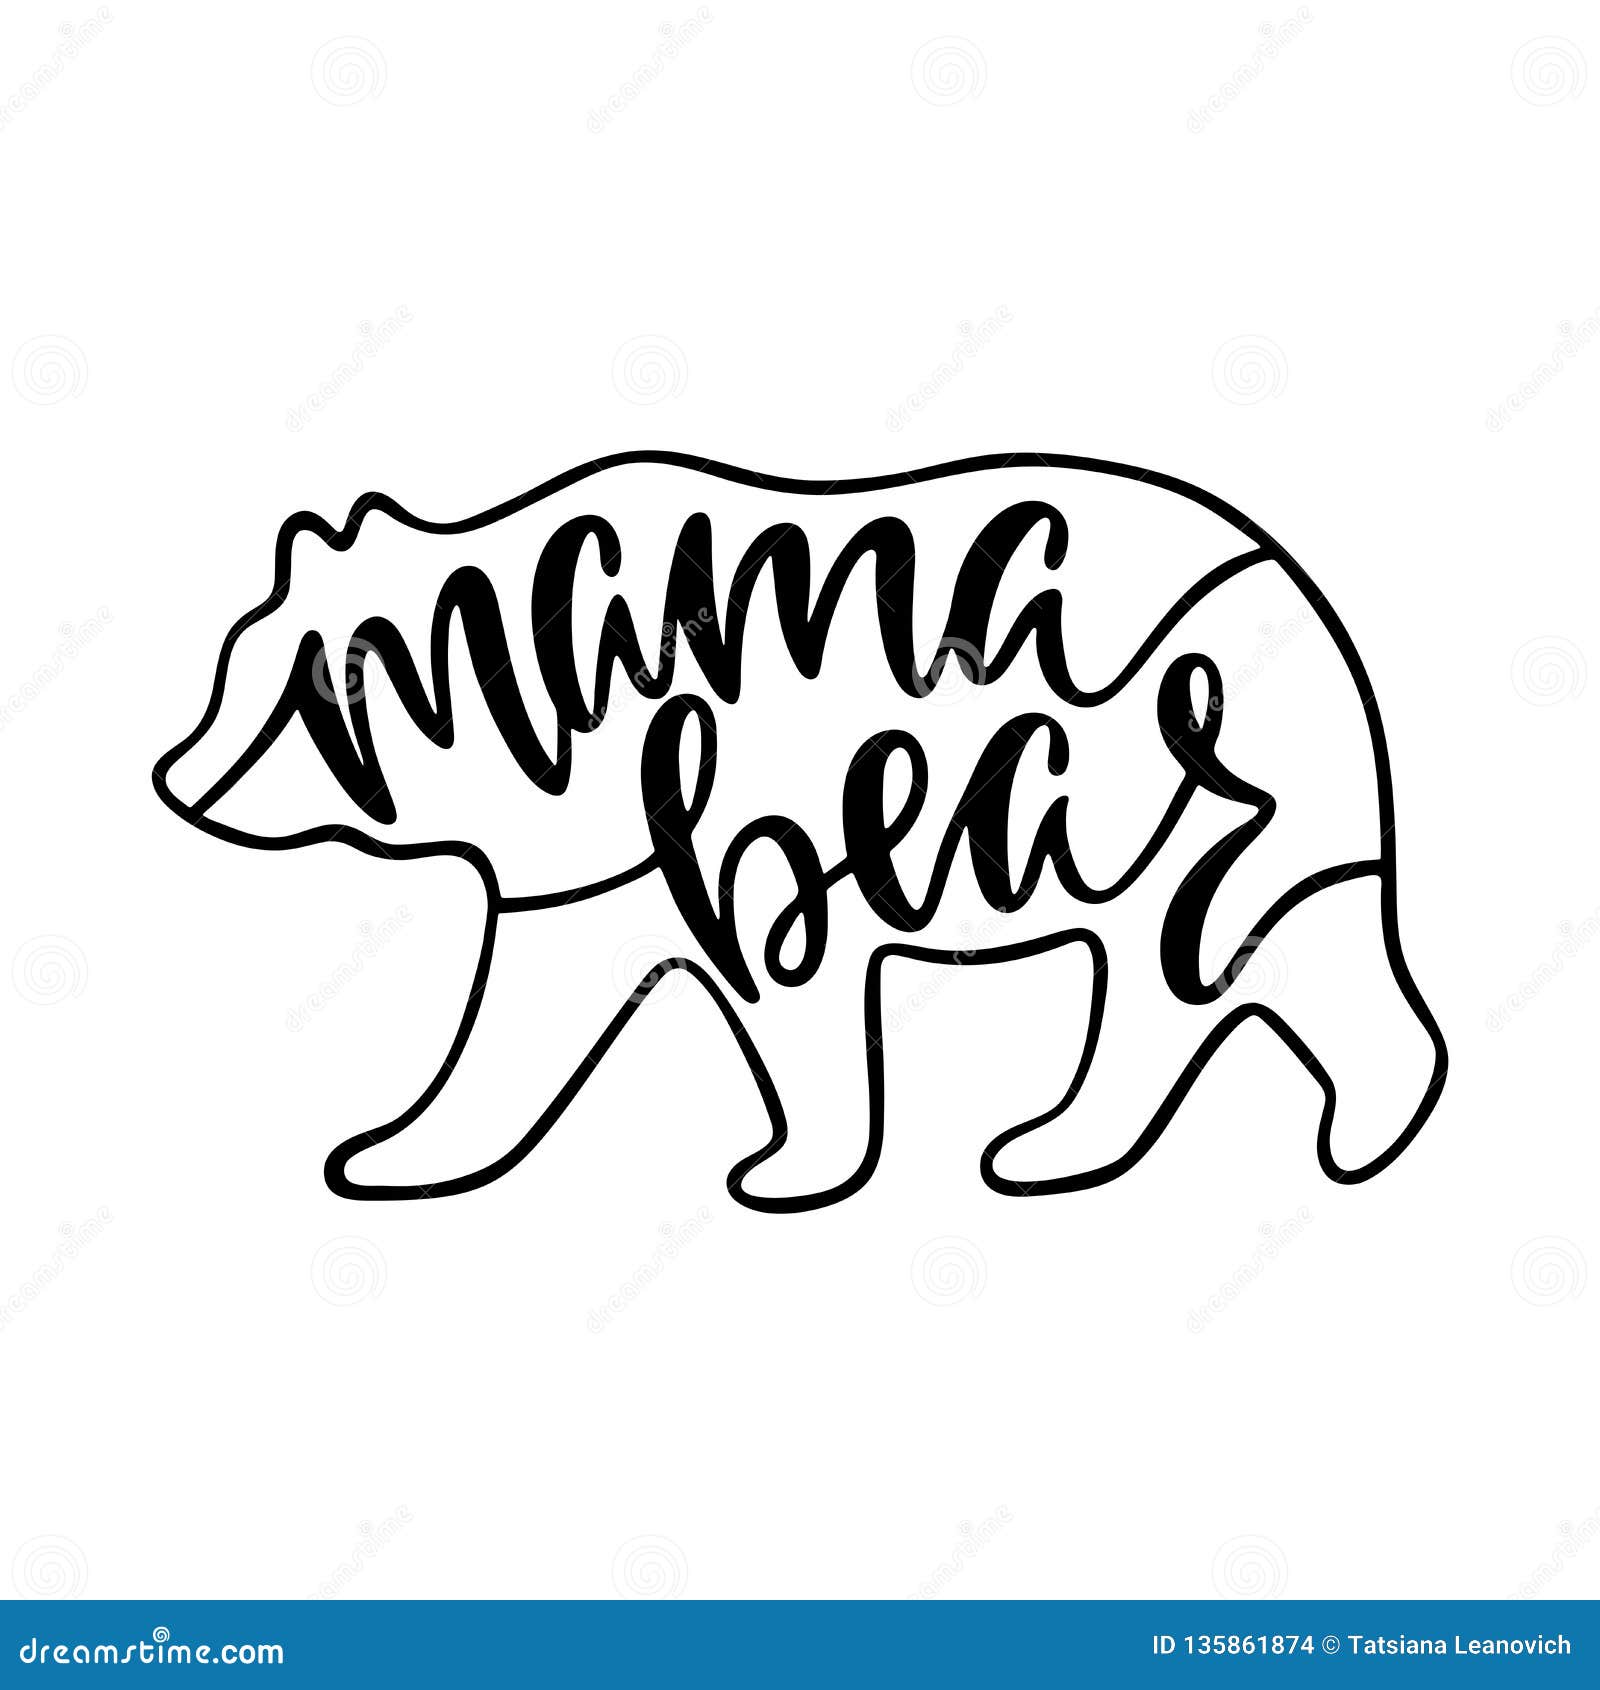 mama bear. inspirational quote with bear silhouette.